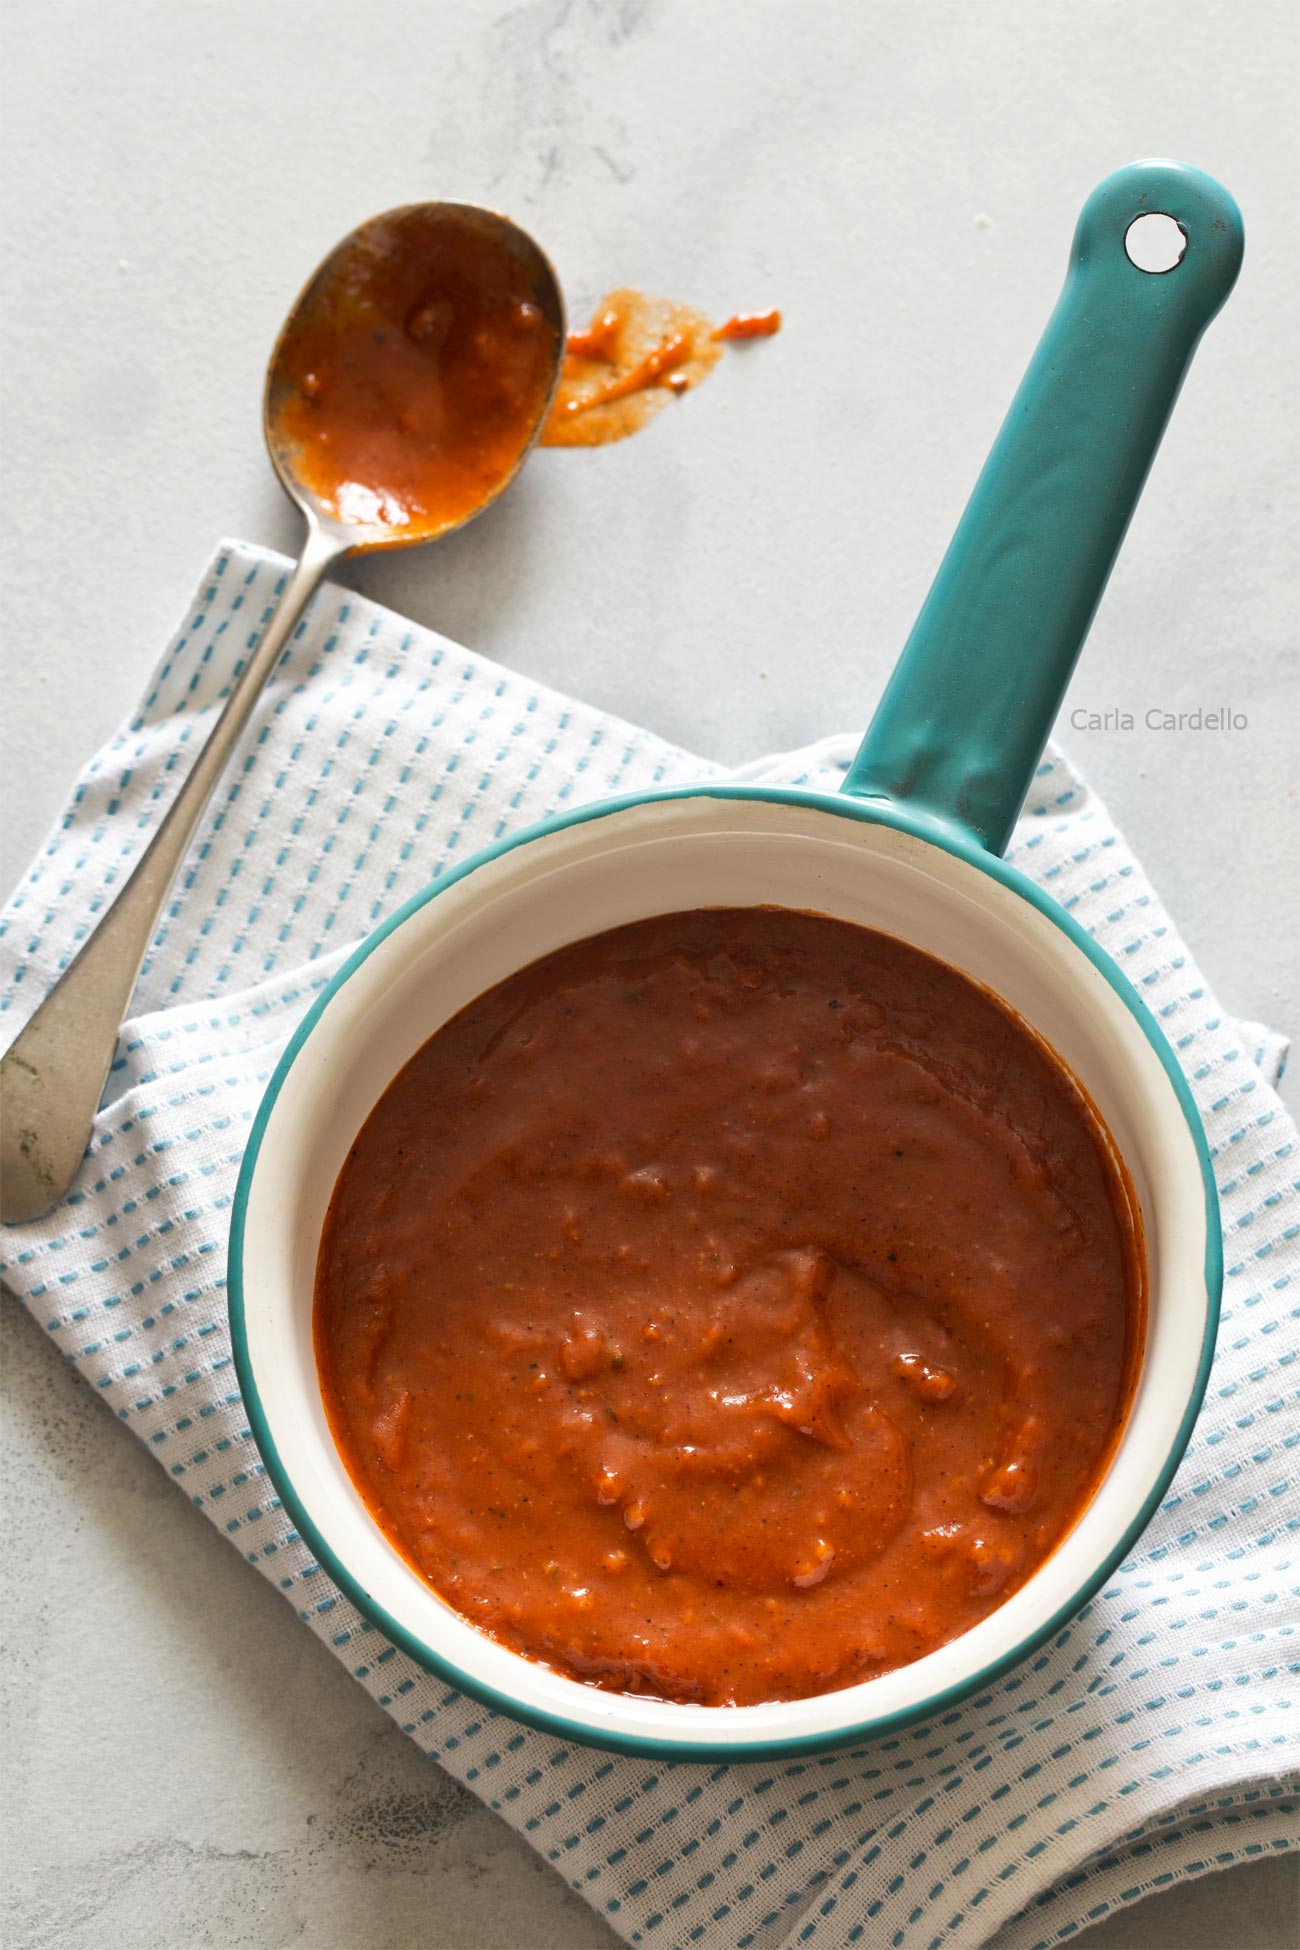 Learn how to make Homemade Red Enchilada Sauce from scratch using tomato sauce and fajita seasoning.